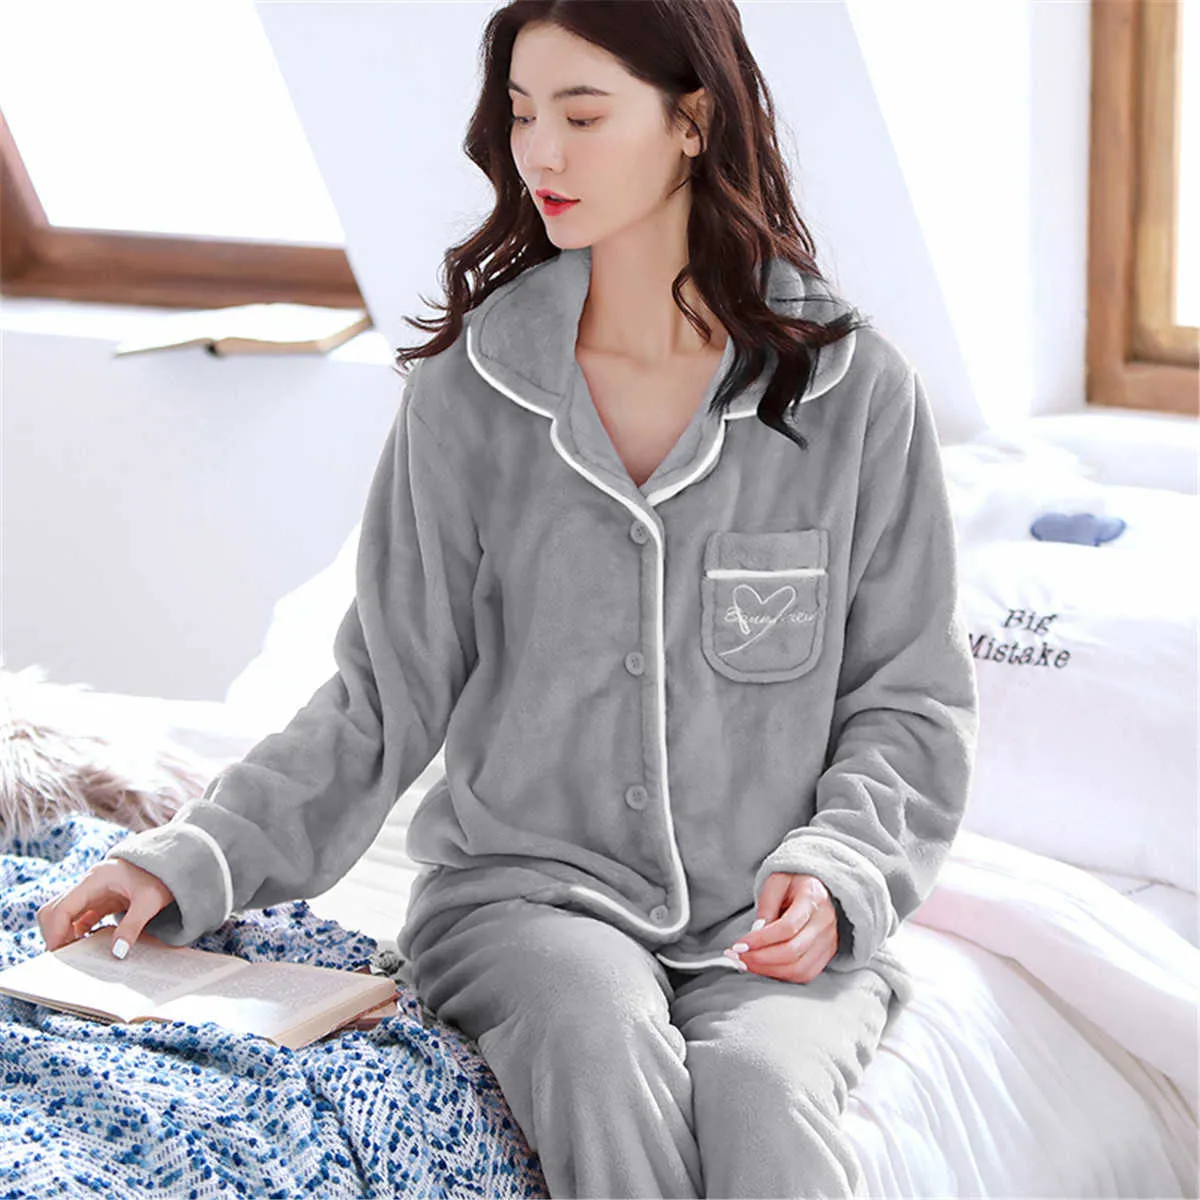 Winter Womens Flannel Pajama Set Thicken Warm Soft Long Sleeve Ackermans  Sleepwear For Ladies For Girls And Ladies From E3zg, $23.27